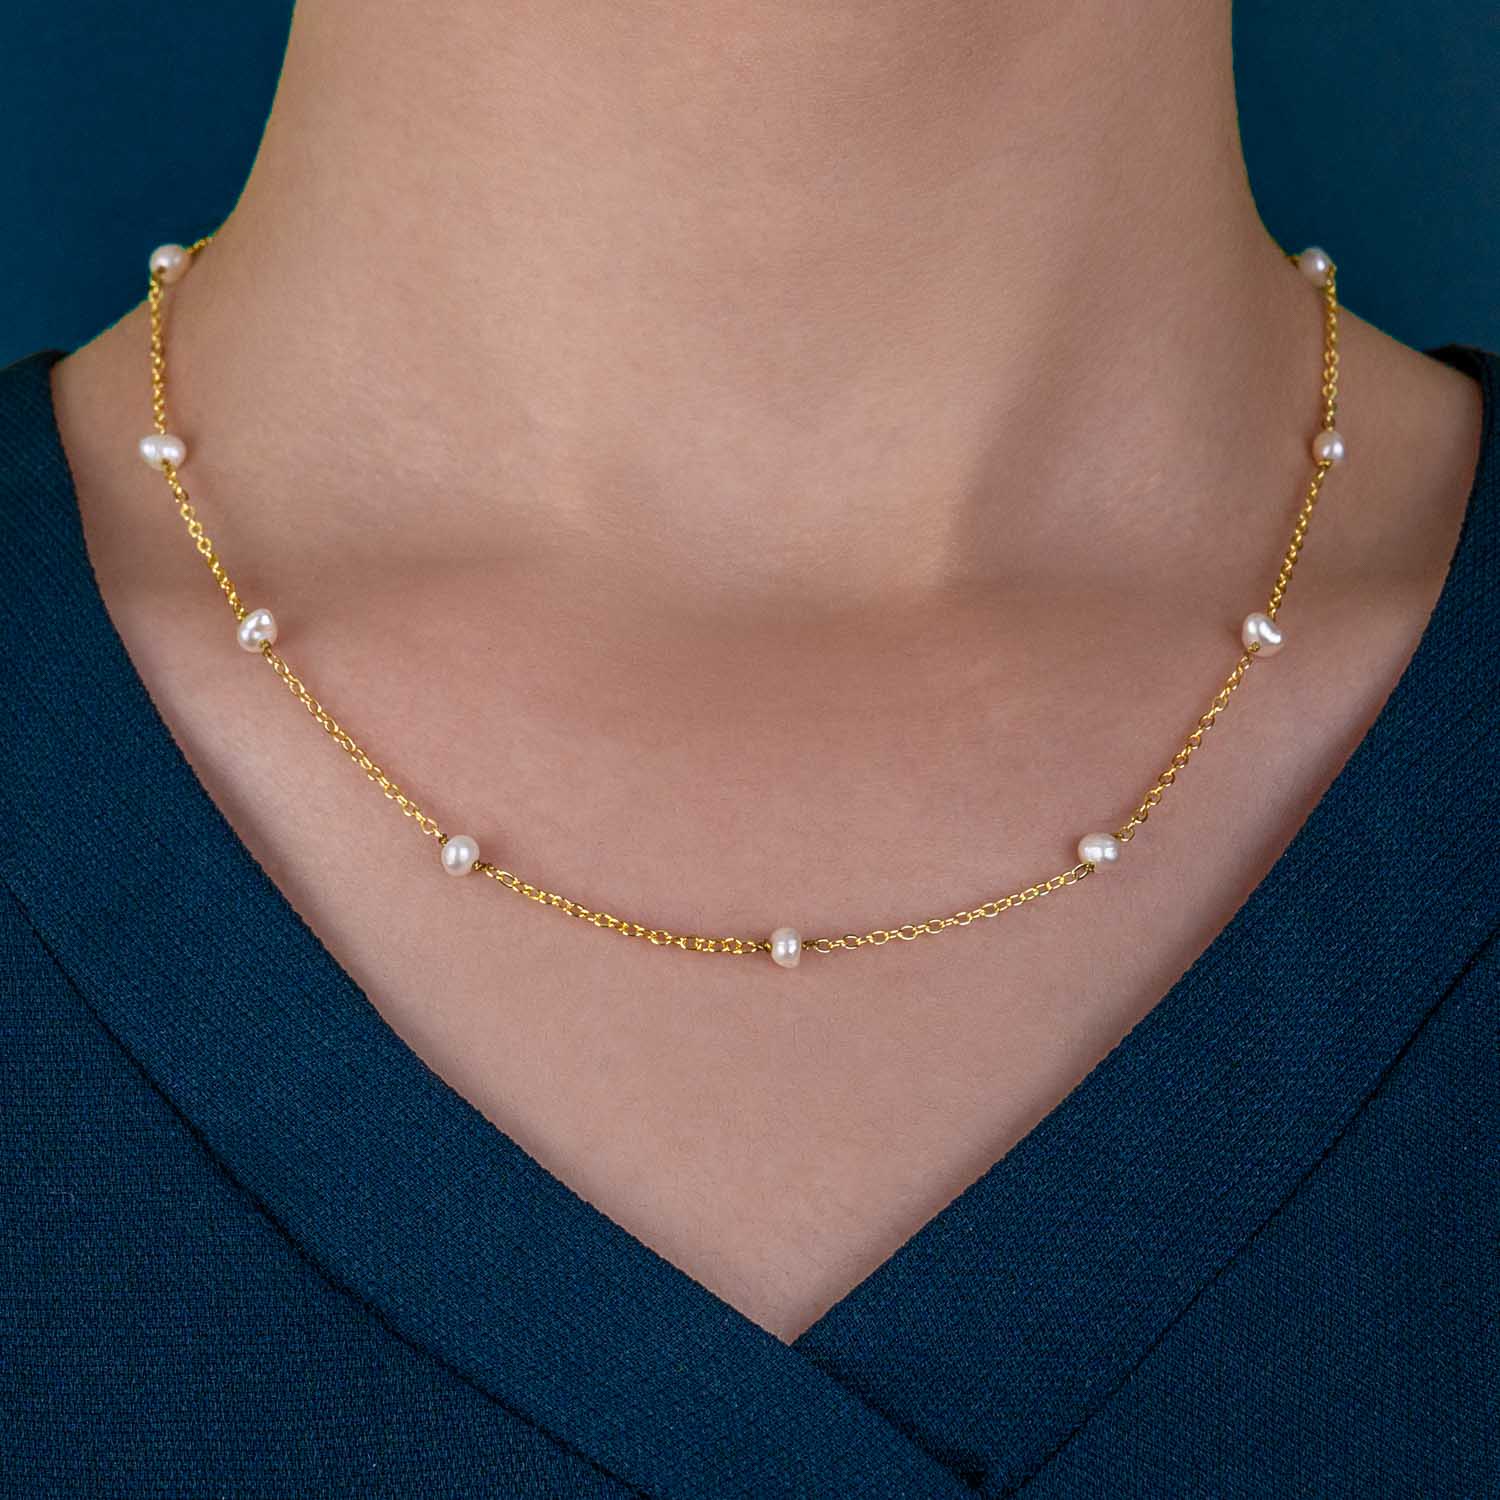 Delicate Gold Necklaces | Cup of Jo | Delicate gold necklace, Jewelry  necklace simple, Pearl jewelry necklace